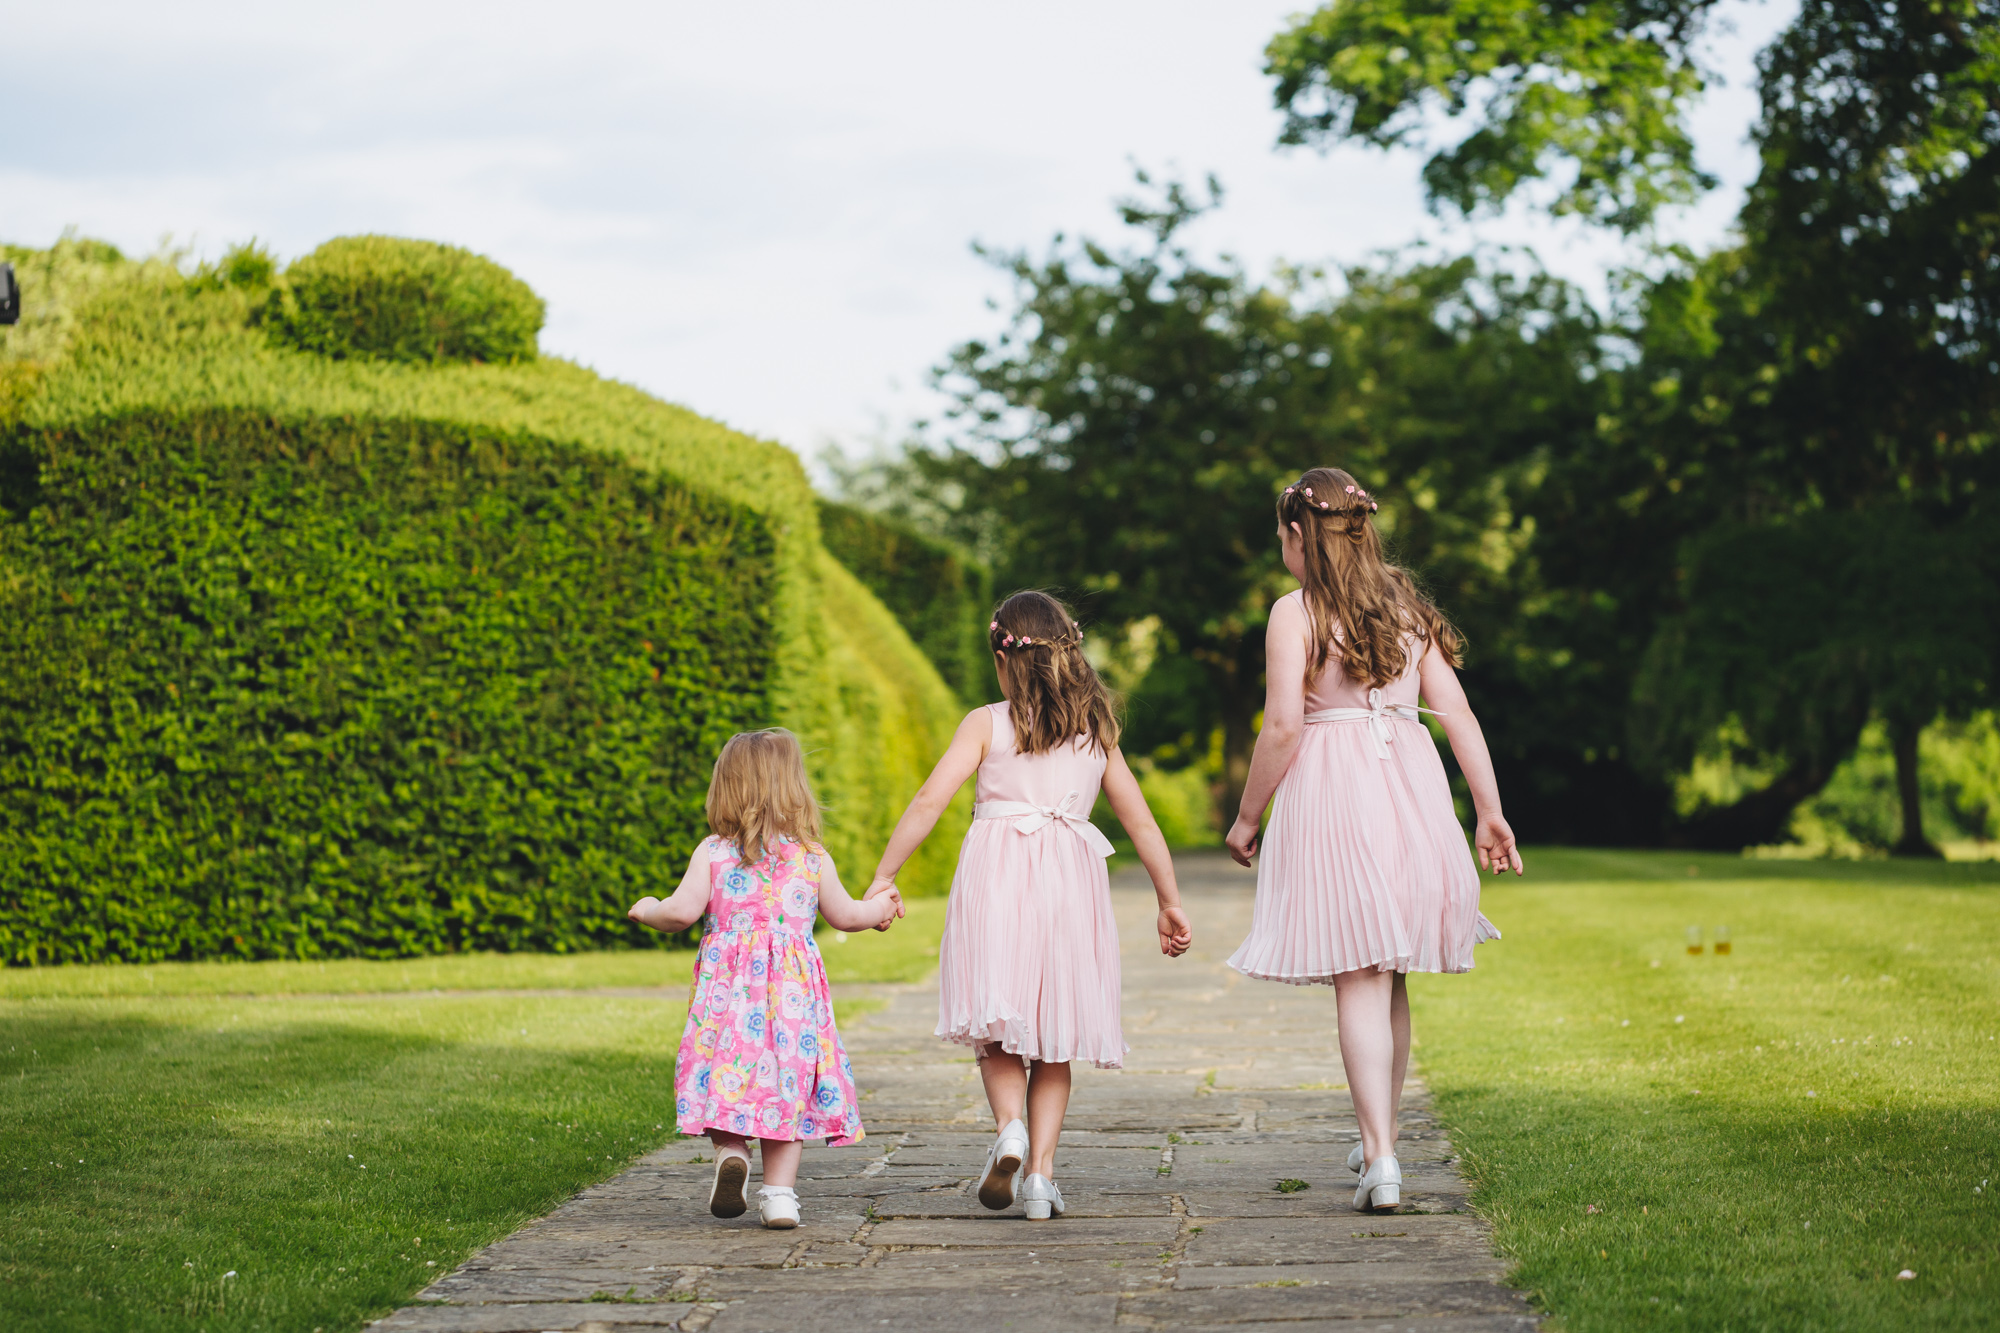 Photos of bridesmaids by south wales wedding photographer. Groom prep